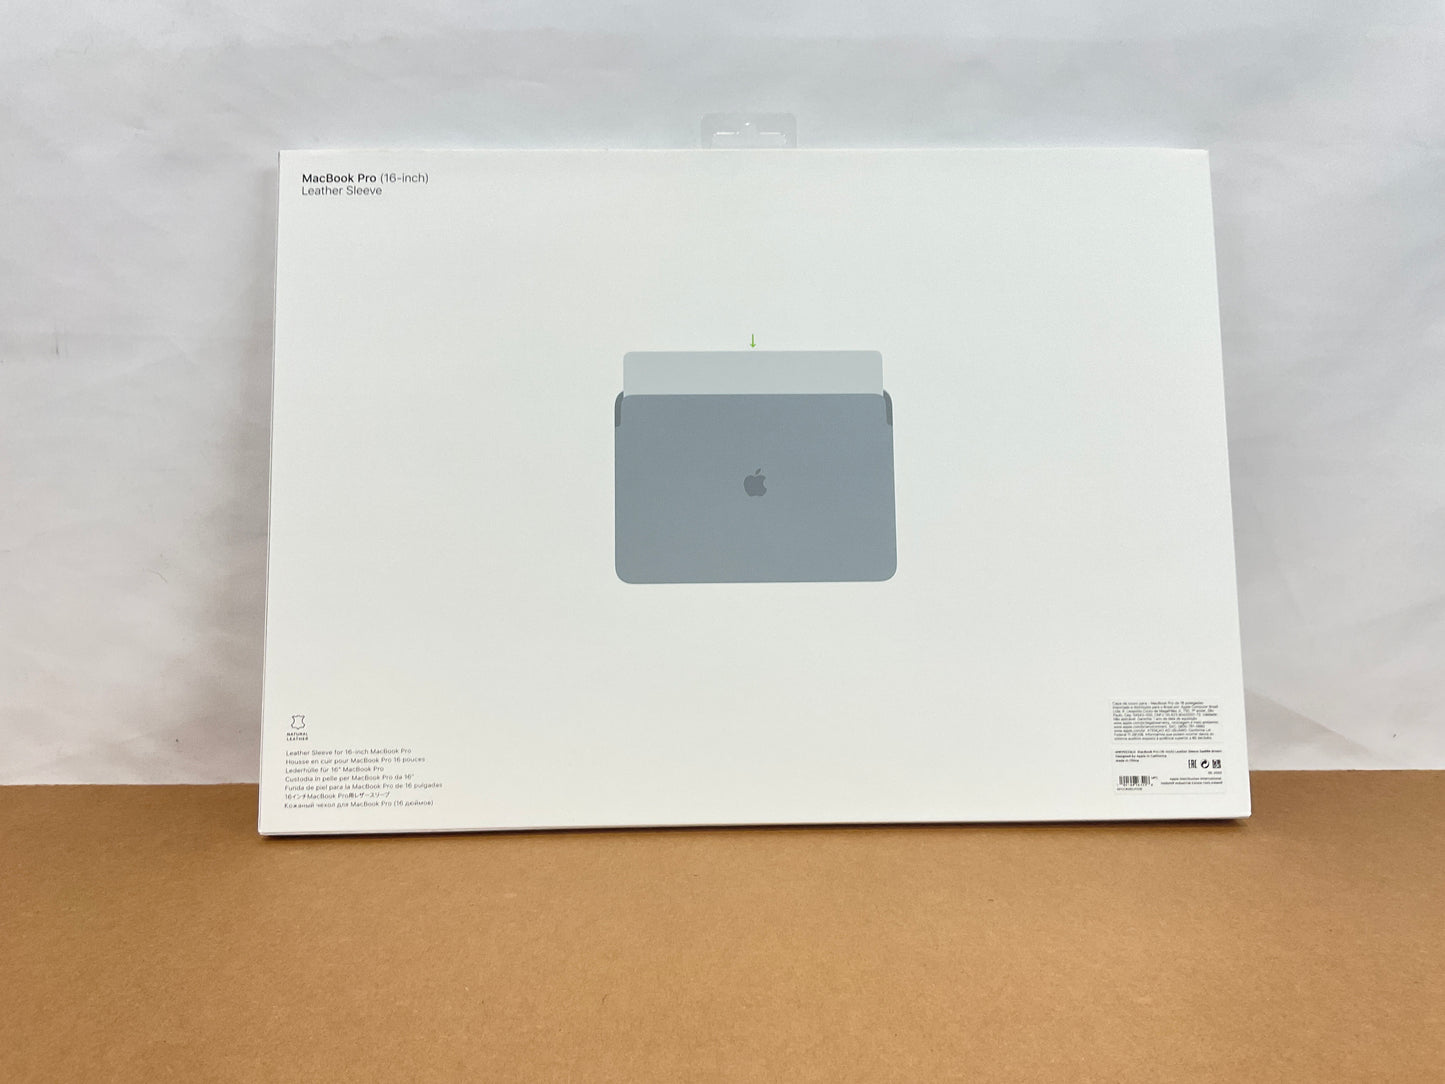 ♥ New, Factory Sealed - Apple Leather Sleeve for 16" MacBook Pro (Saddle Brown) MWV92ZM/A